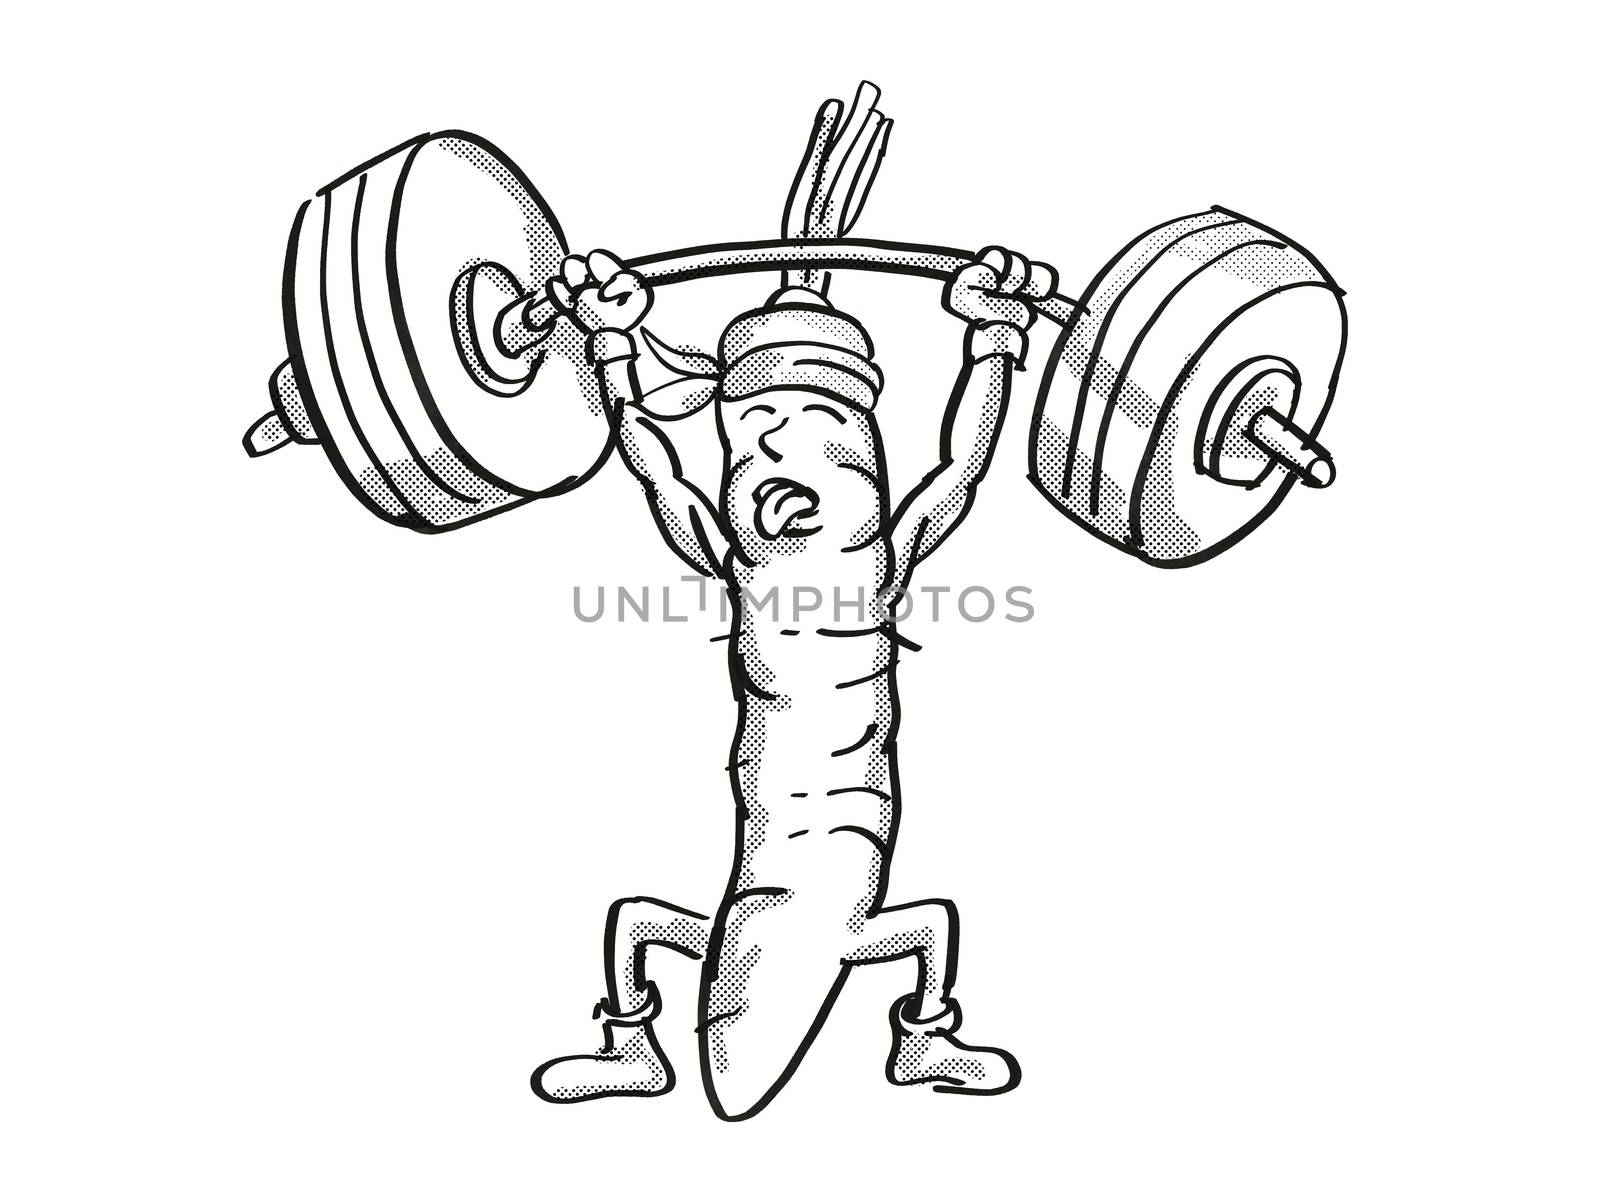 Retro cartoon style drawing of a Carrot, a healthy vegetable lifting a barbell on isolated white background done in black and white.